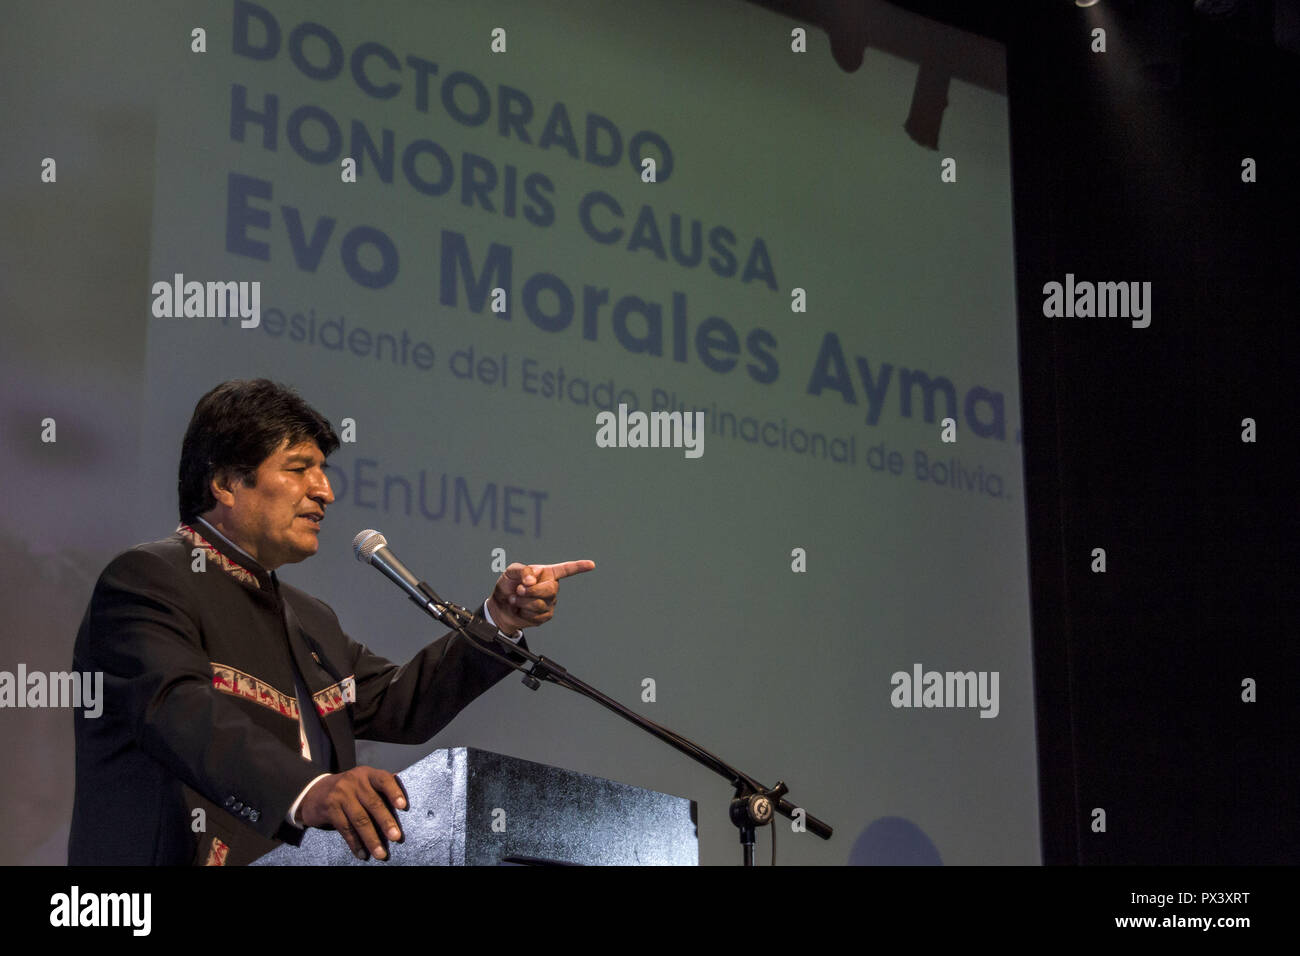 Buenos Aires, Federal Capital, Argentina. 19th Oct, 2018. The president of Bolivia, Evo Morales, was distinguished with the Doctorate Honoris Causa at the Metropolitan University for Education and Labor (UMET). The house of studies of the workers of the union of building managers recognized the trajectory and the actions of the Bolivian leader in the promotion of education and social inclusion as an equalizing factor. Credit: Roberto Almeida Aveledo/ZUMA Wire/Alamy Live News Stock Photo